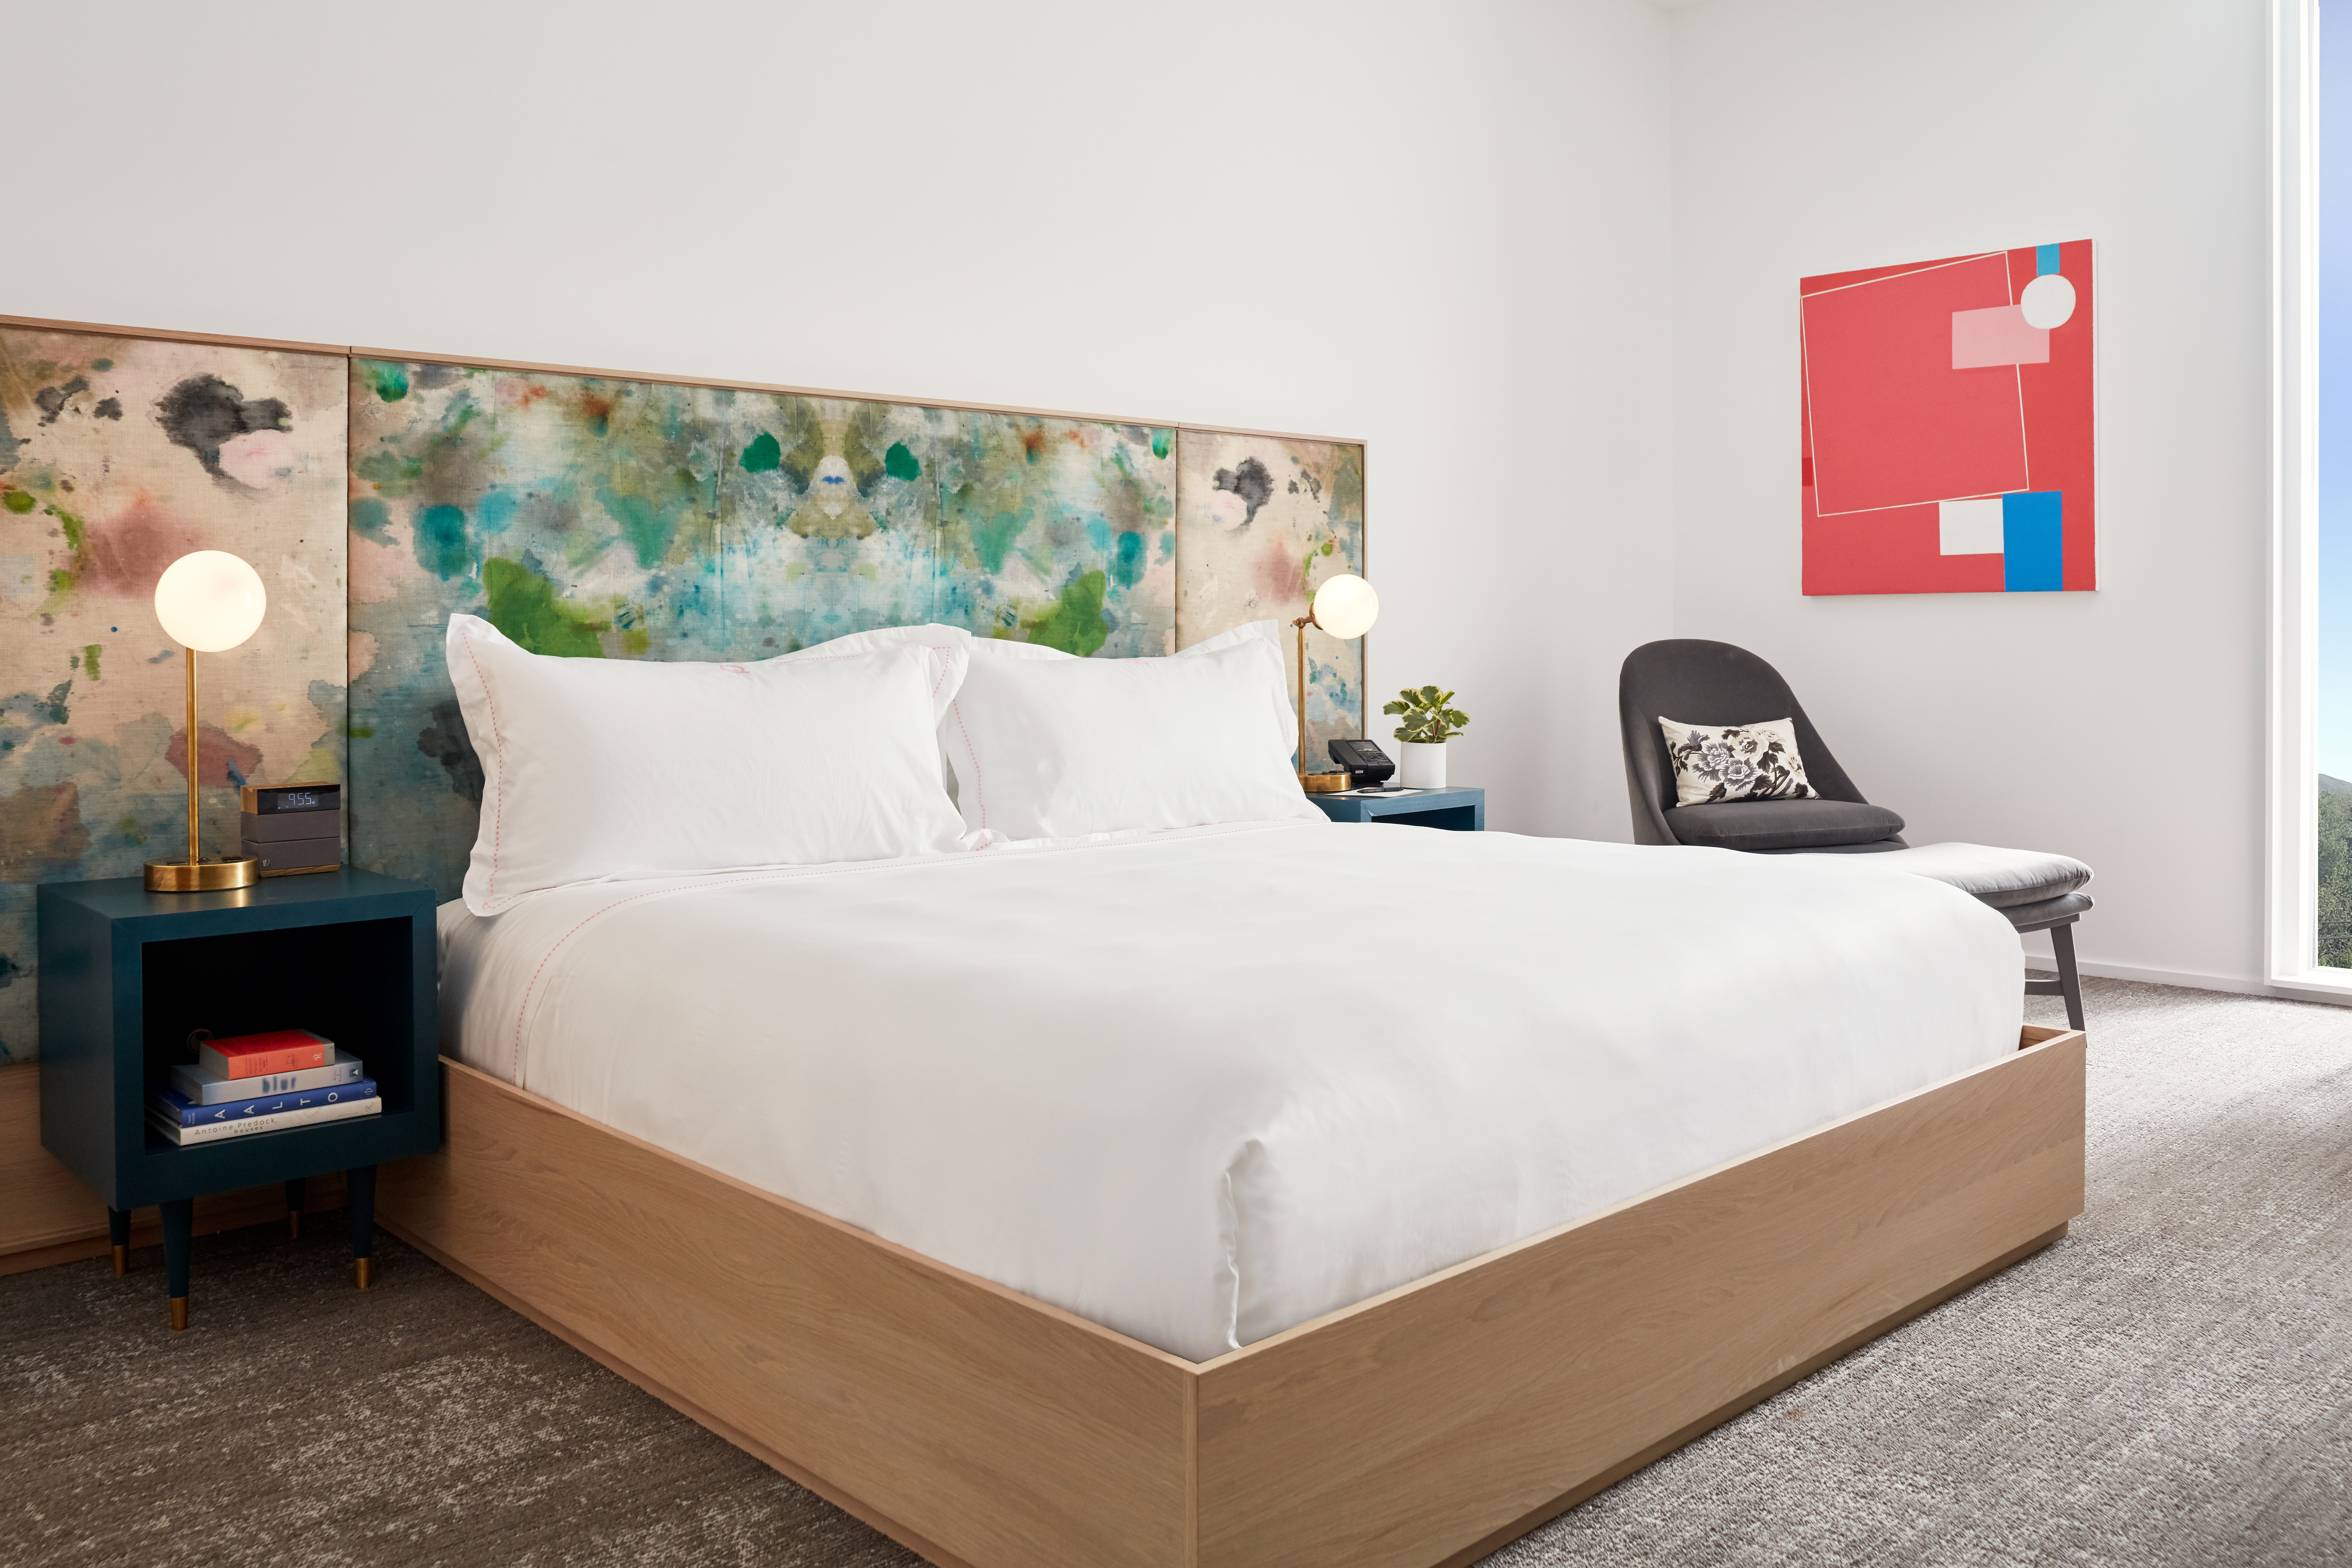 Quirk Hotel Charlottesville Opens Today As Part Of Destination